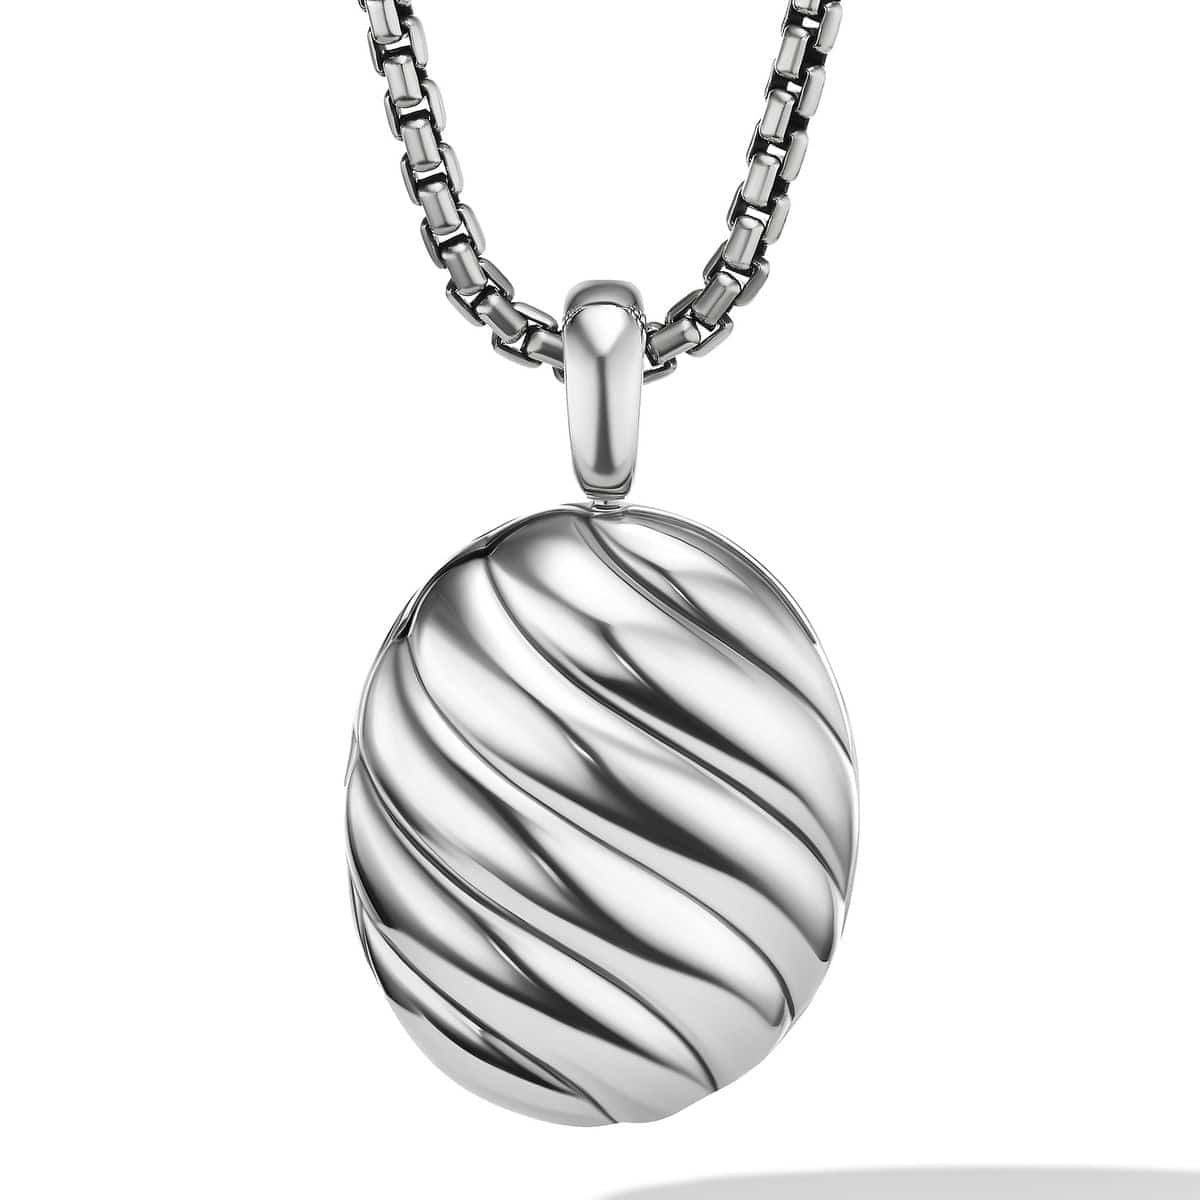 Sculpted Cable Locket Amulet, Sterling Silver, Long's Jewelers